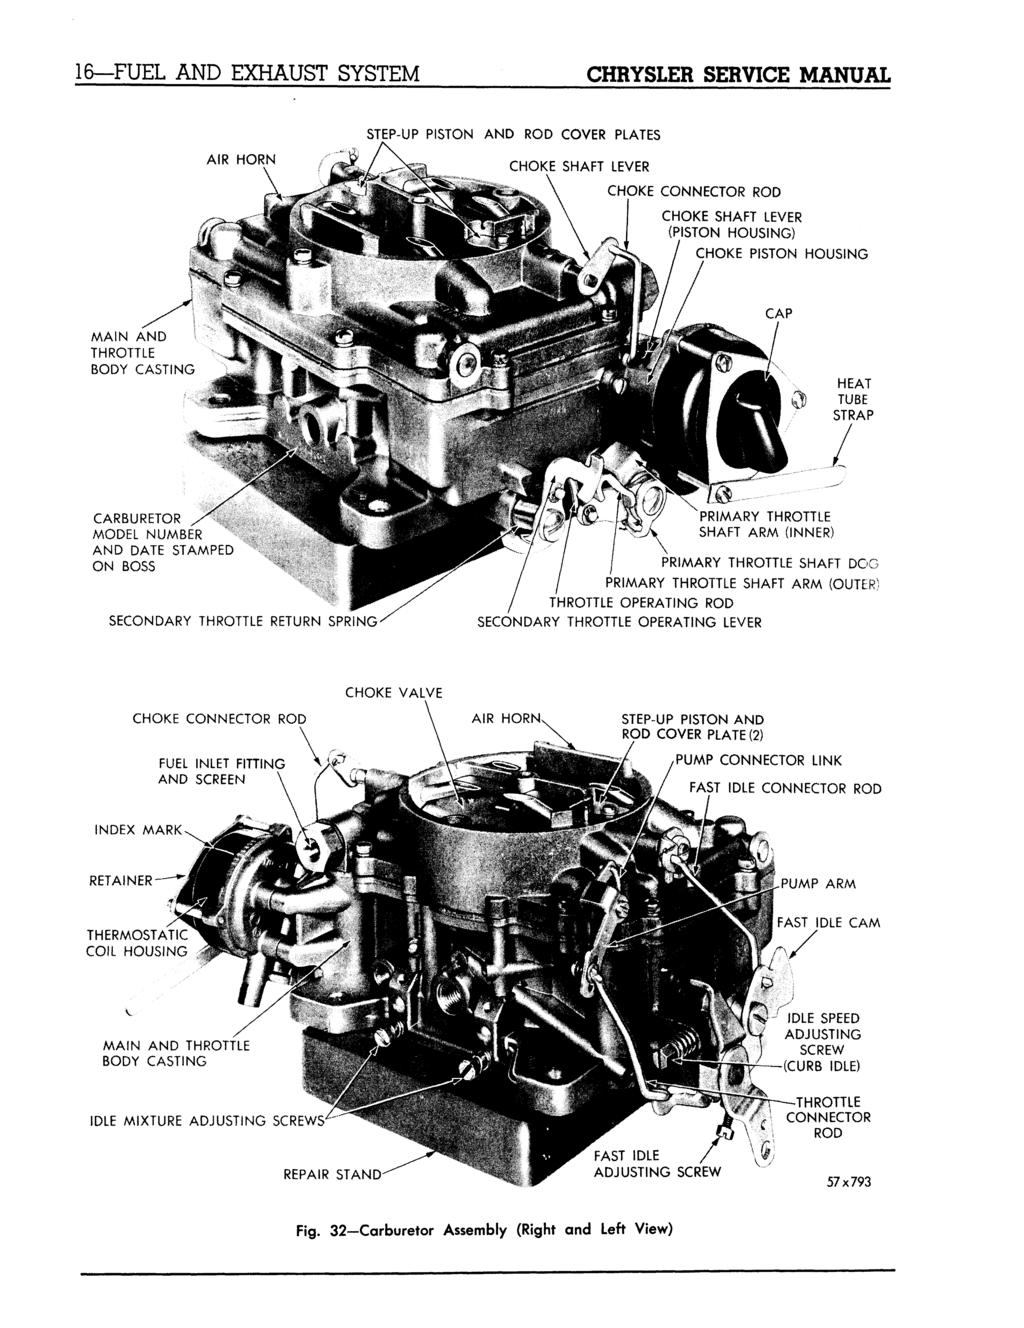 16 FUEL AND EXHAUST SYSTEM CHRYSLER SERVICE MANUAL STEP-UP PISTON AND ROD COVER PLATES AIR HORN CHOKE SHAFT LEVER CHOKE CONNECTOR ROD CHOKE SHAFT LEVER (PISTON HOUSING) CHOKE PISTON HOUSING MAIN AND